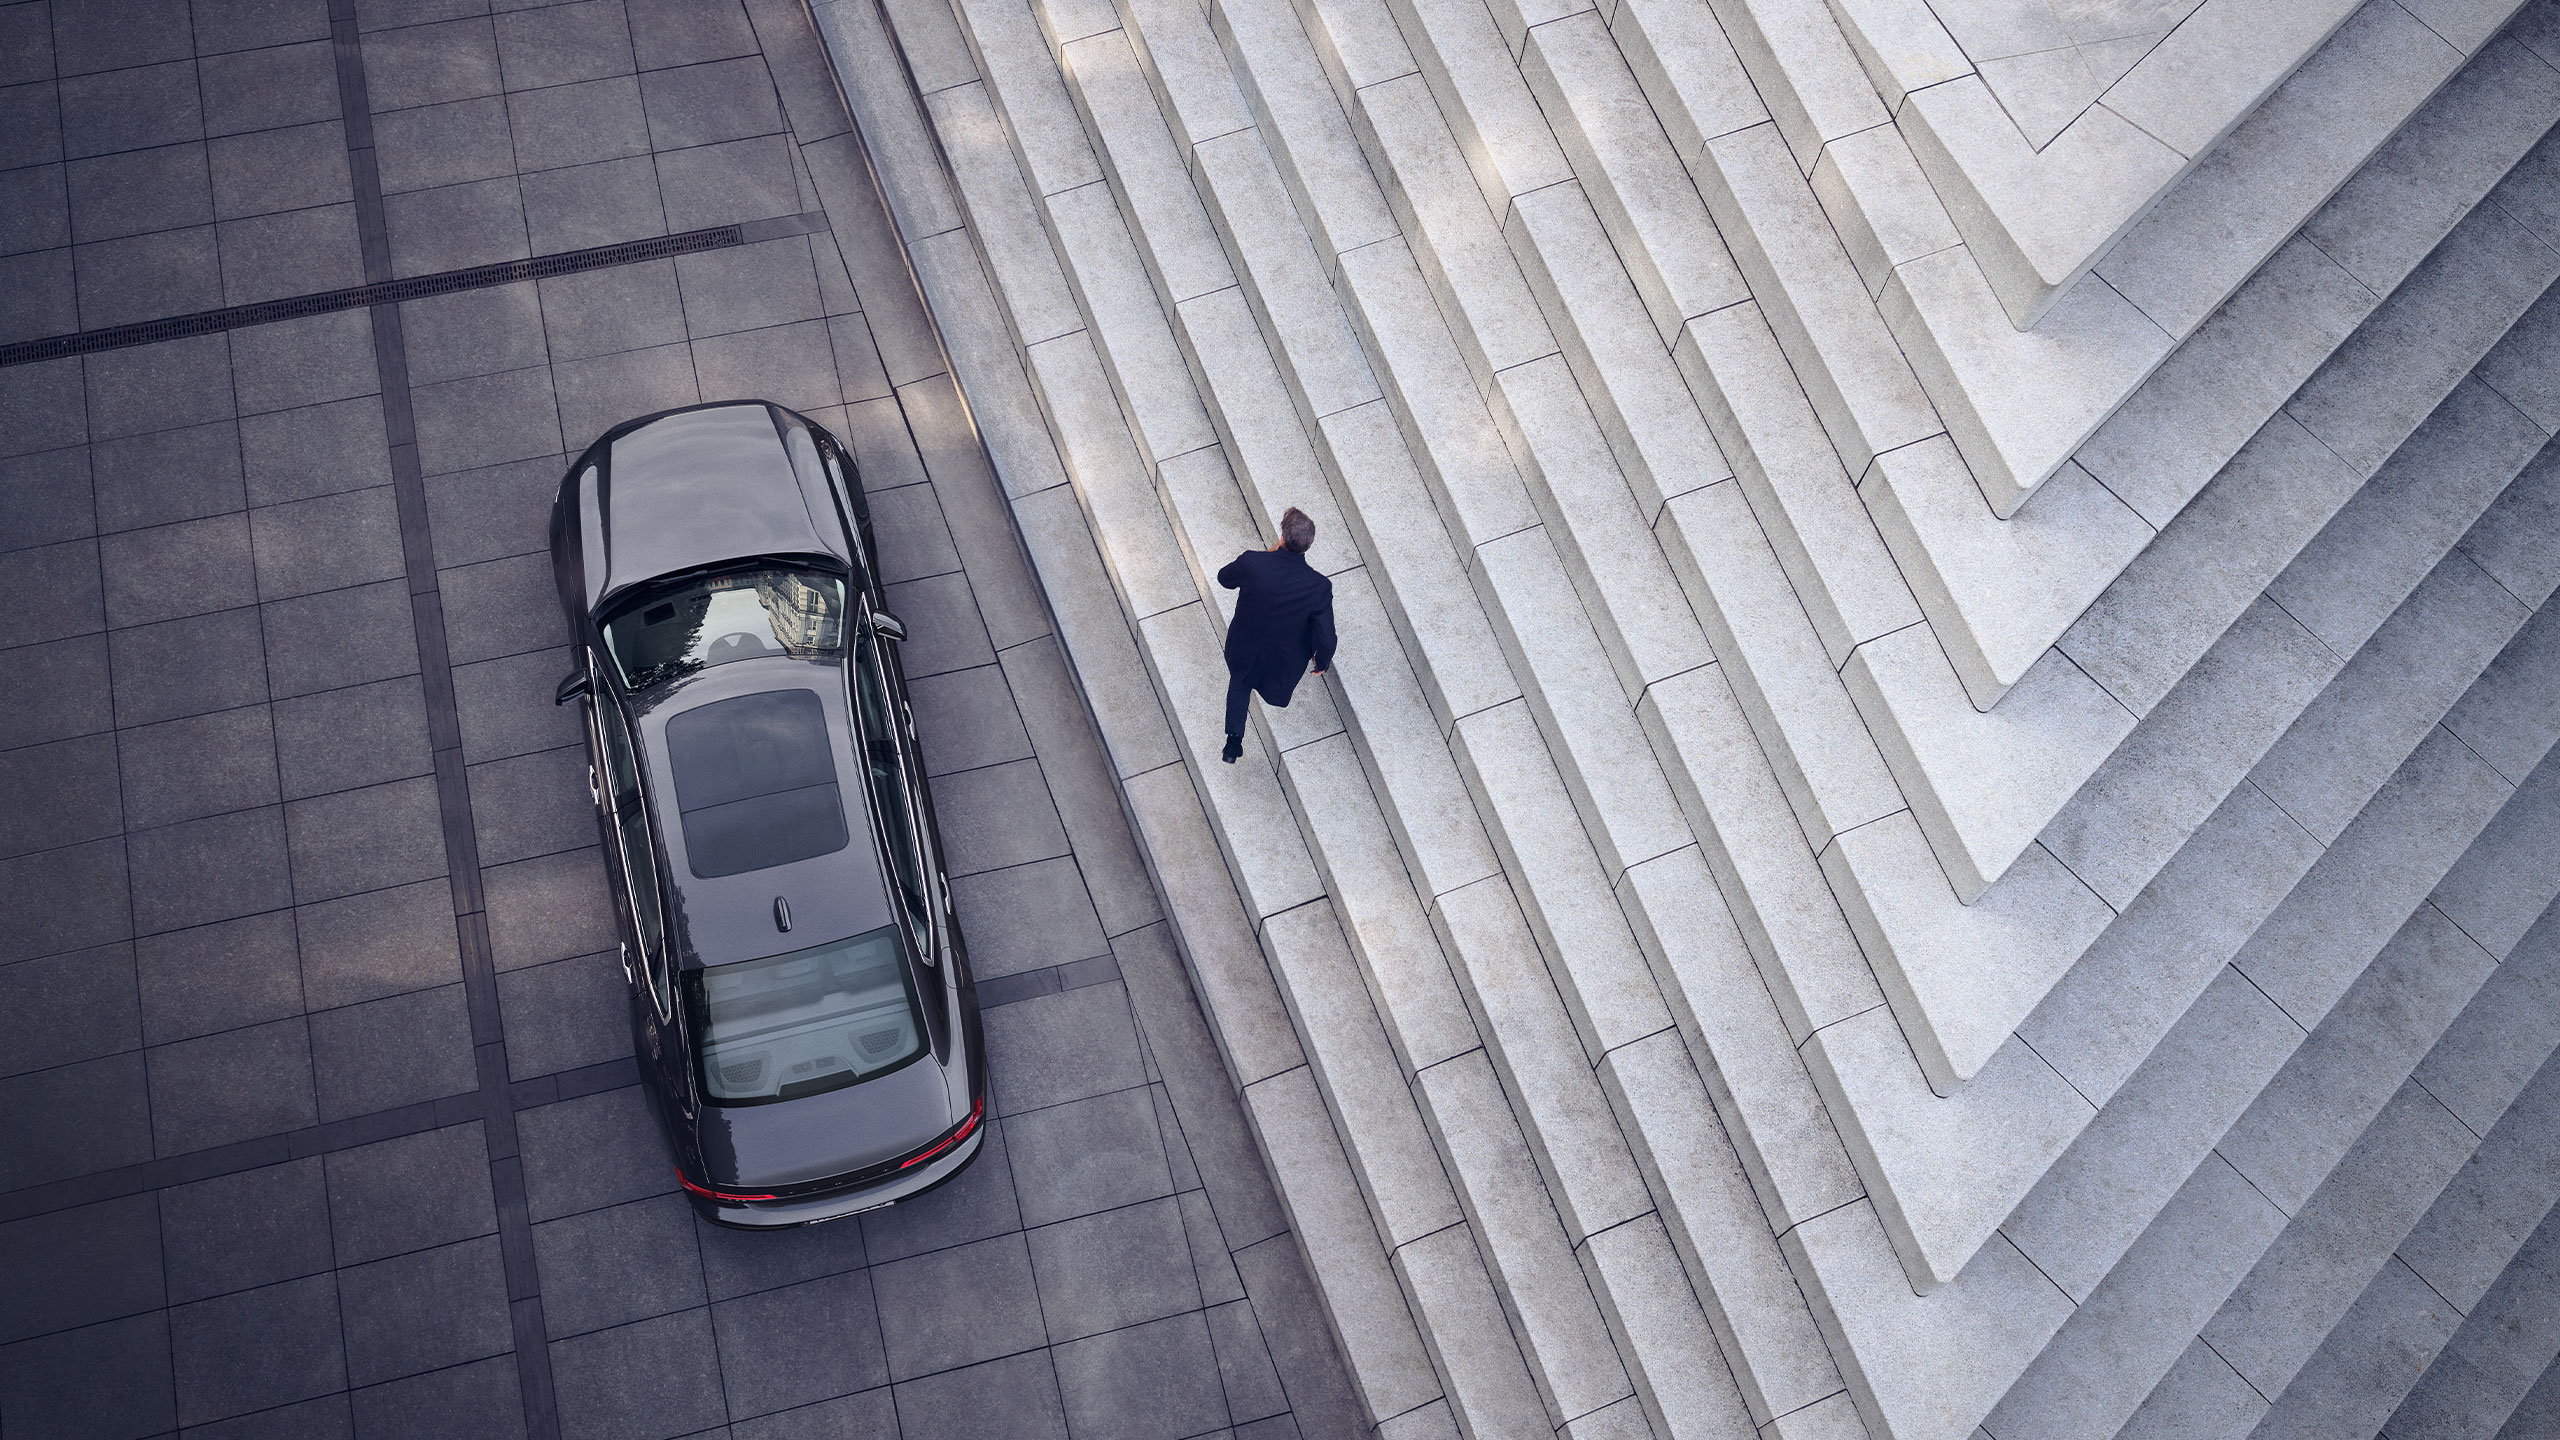 Bird's view of a man leaving his Volvo S90 parked beside graphical marble stairs.